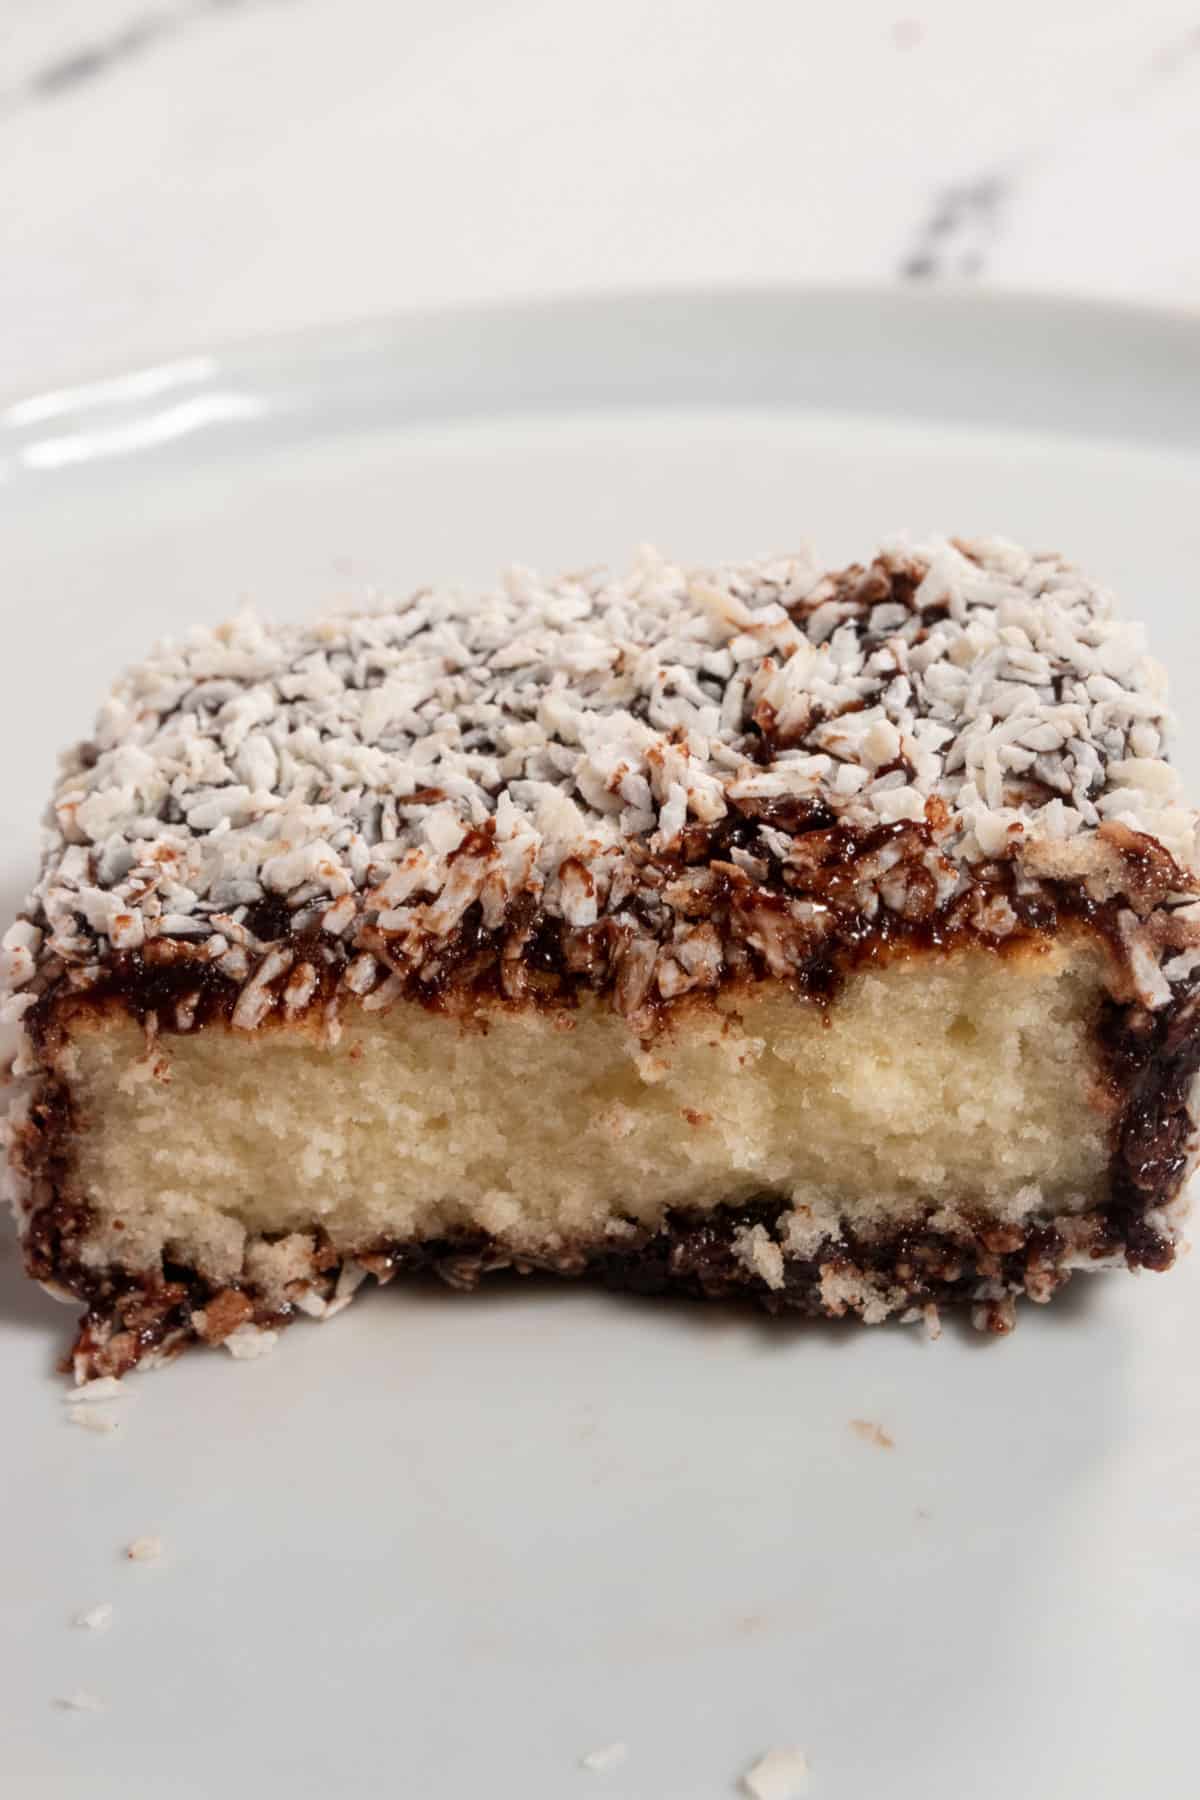 A vegan Lamington bar on a white serving plate. The front of the cake has been sliced off revealing the soft cake in the center.